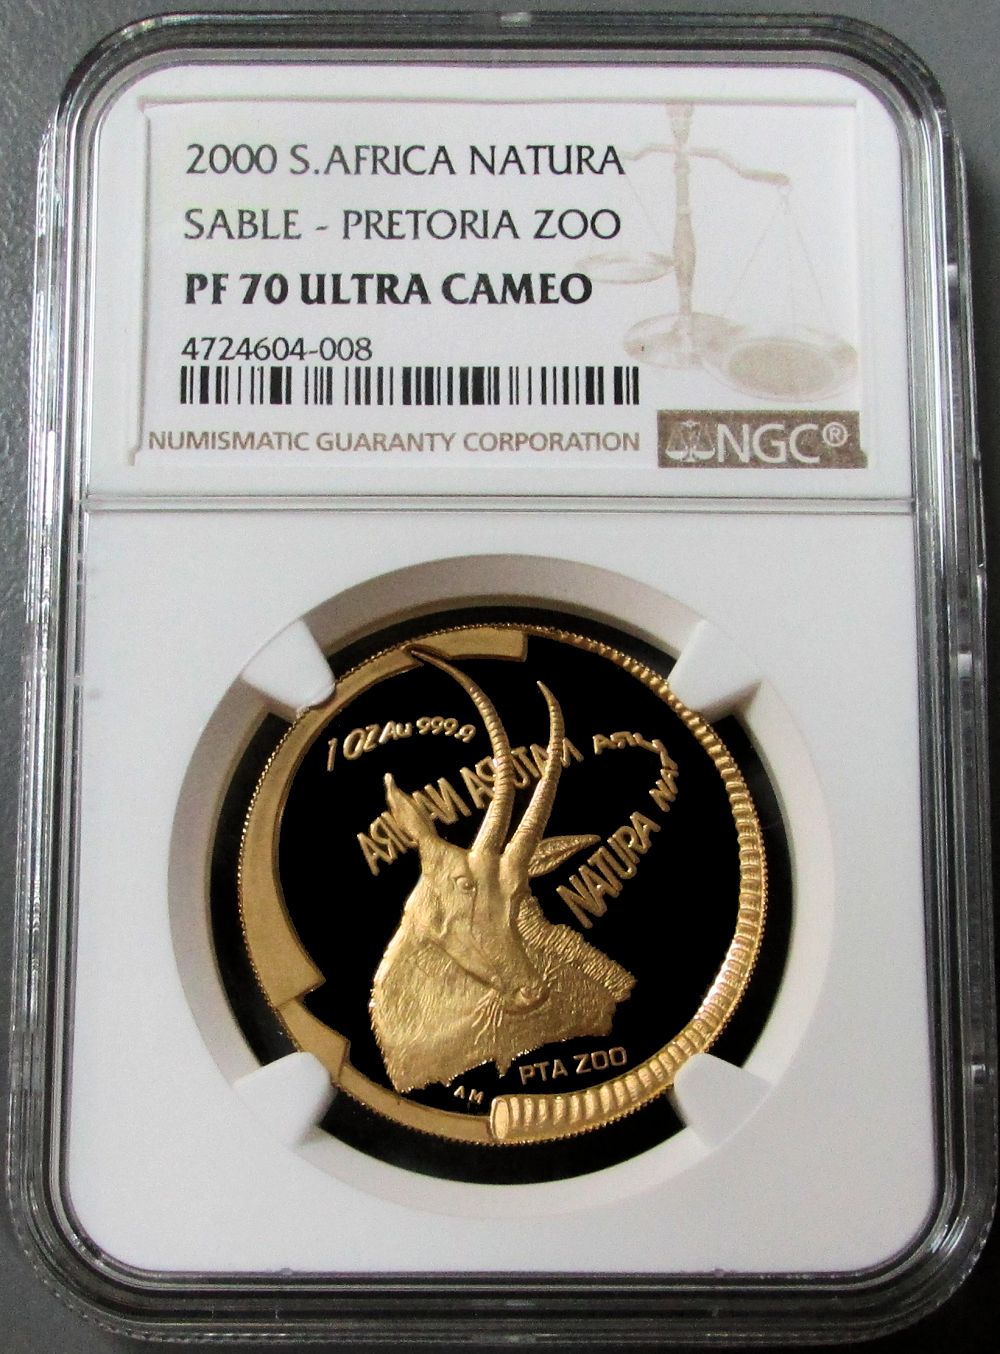 2000 GOLD SOUTH AFRICA NATURA PRETORIA ZOO PRIVY NGC PROOF 70 ULTRA CAMEO "MONARCHS OF AFRICA NATURA SERIES "SABLE QUEEN OF THE ANTELOPE" 591 MINTED